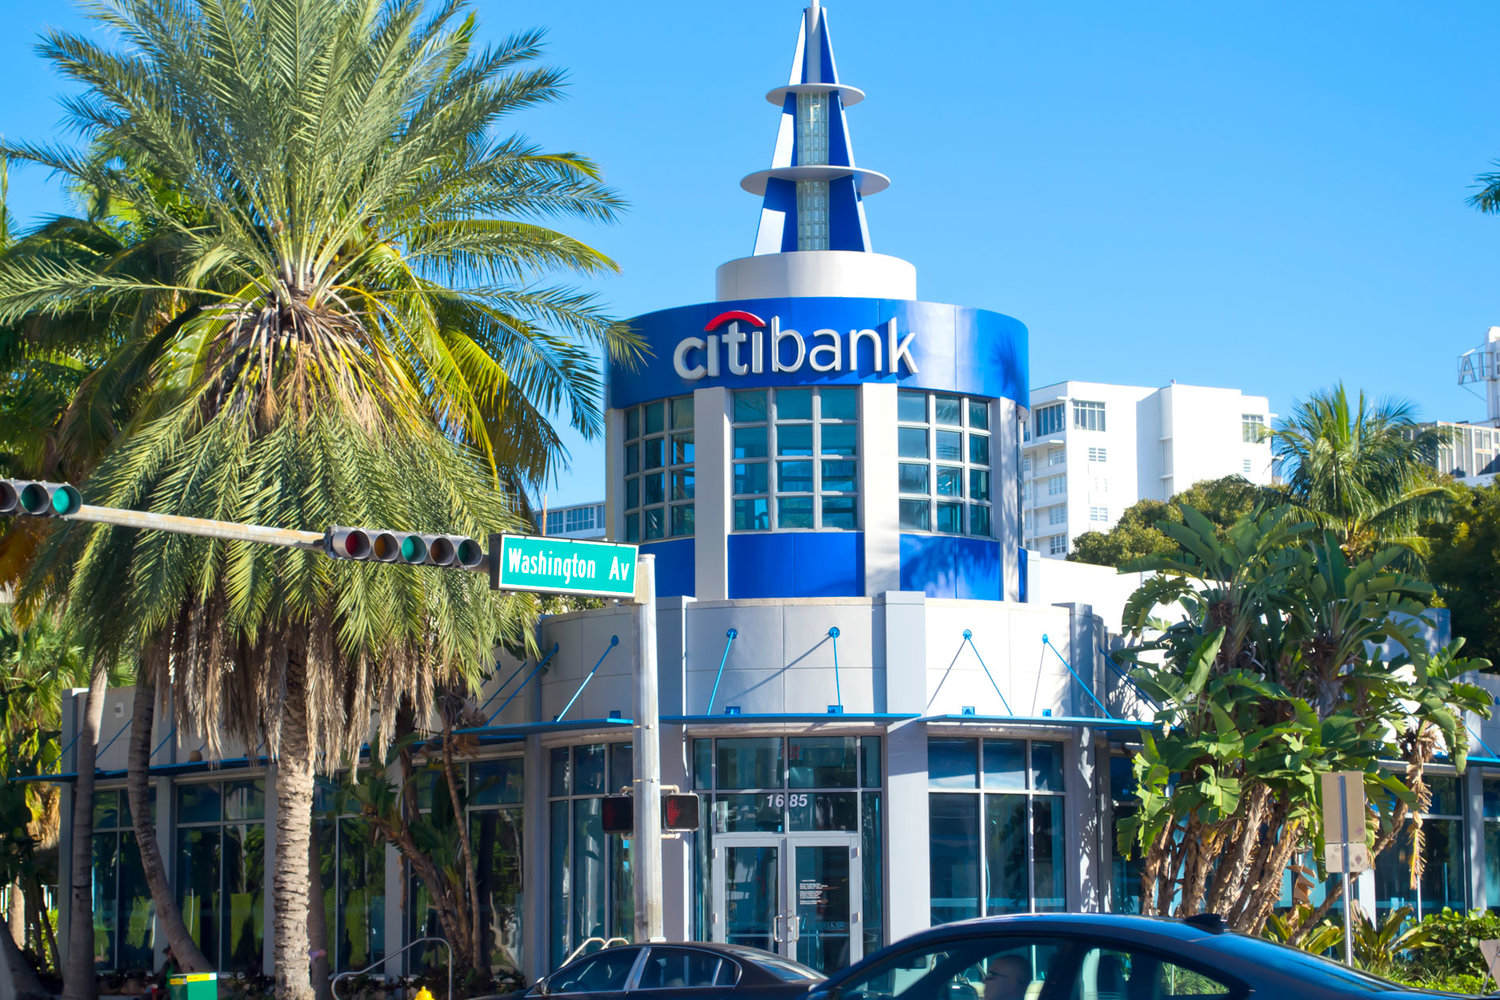 Finvarb Plans to Turn Citibank Property into a 150-Room Hotel